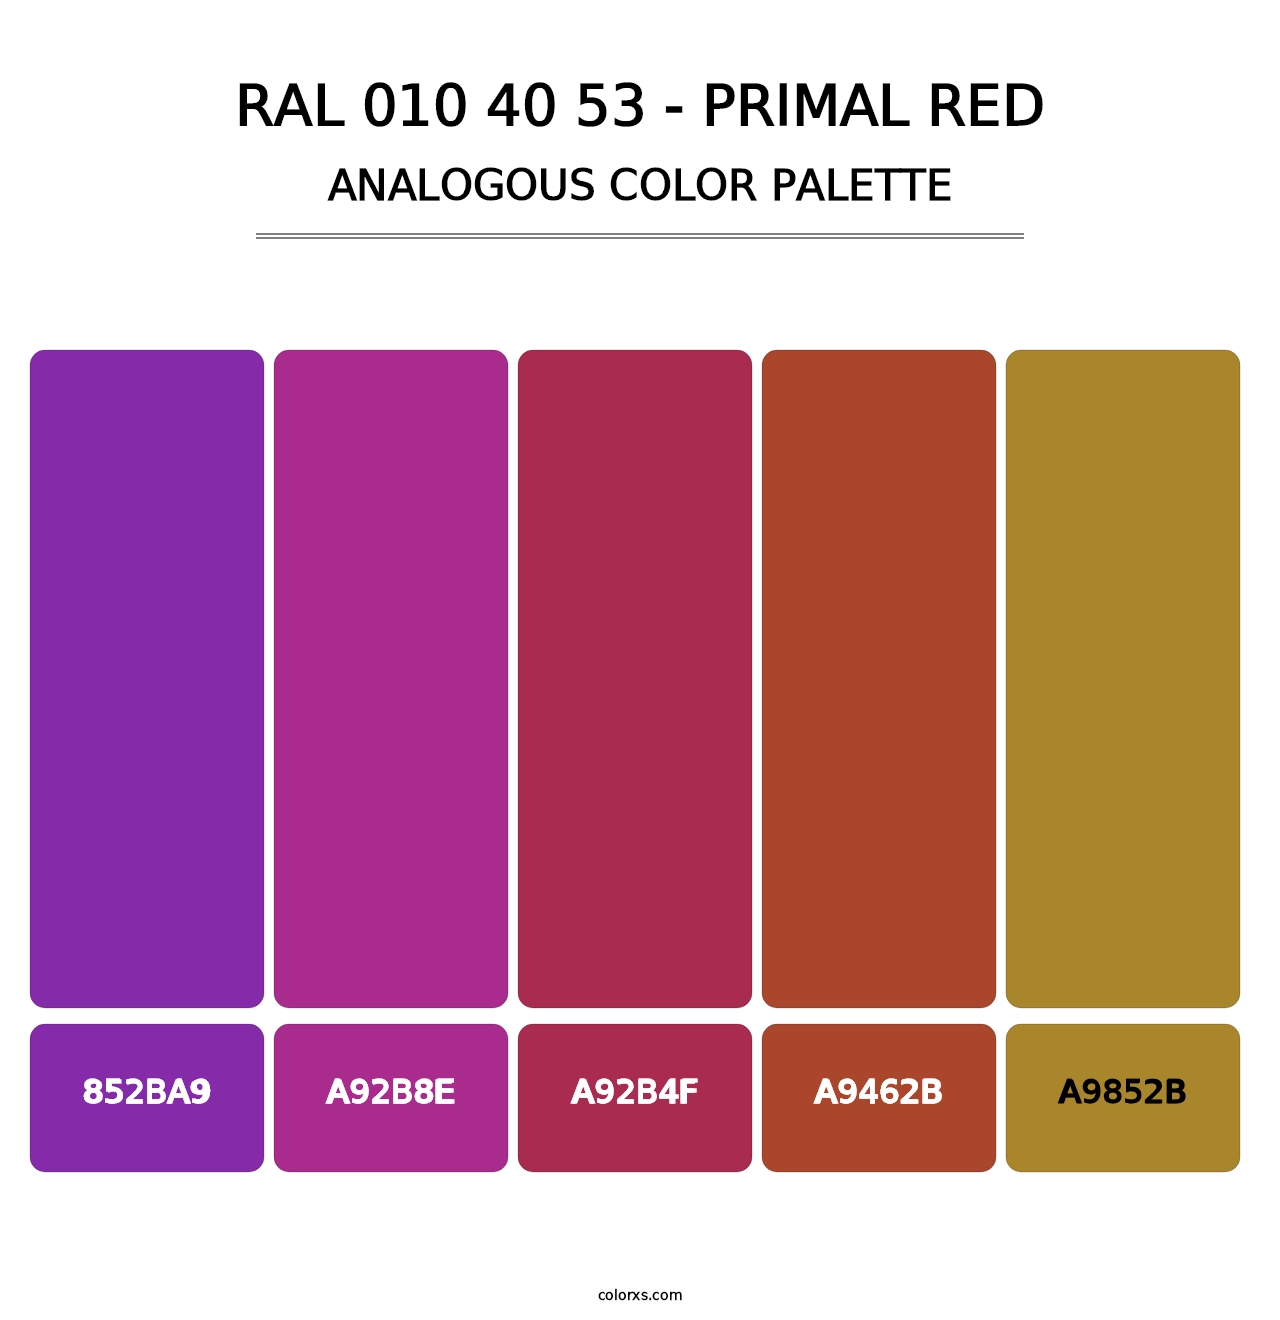 RAL 010 40 53 - Primal Red - Analogous Color Palette